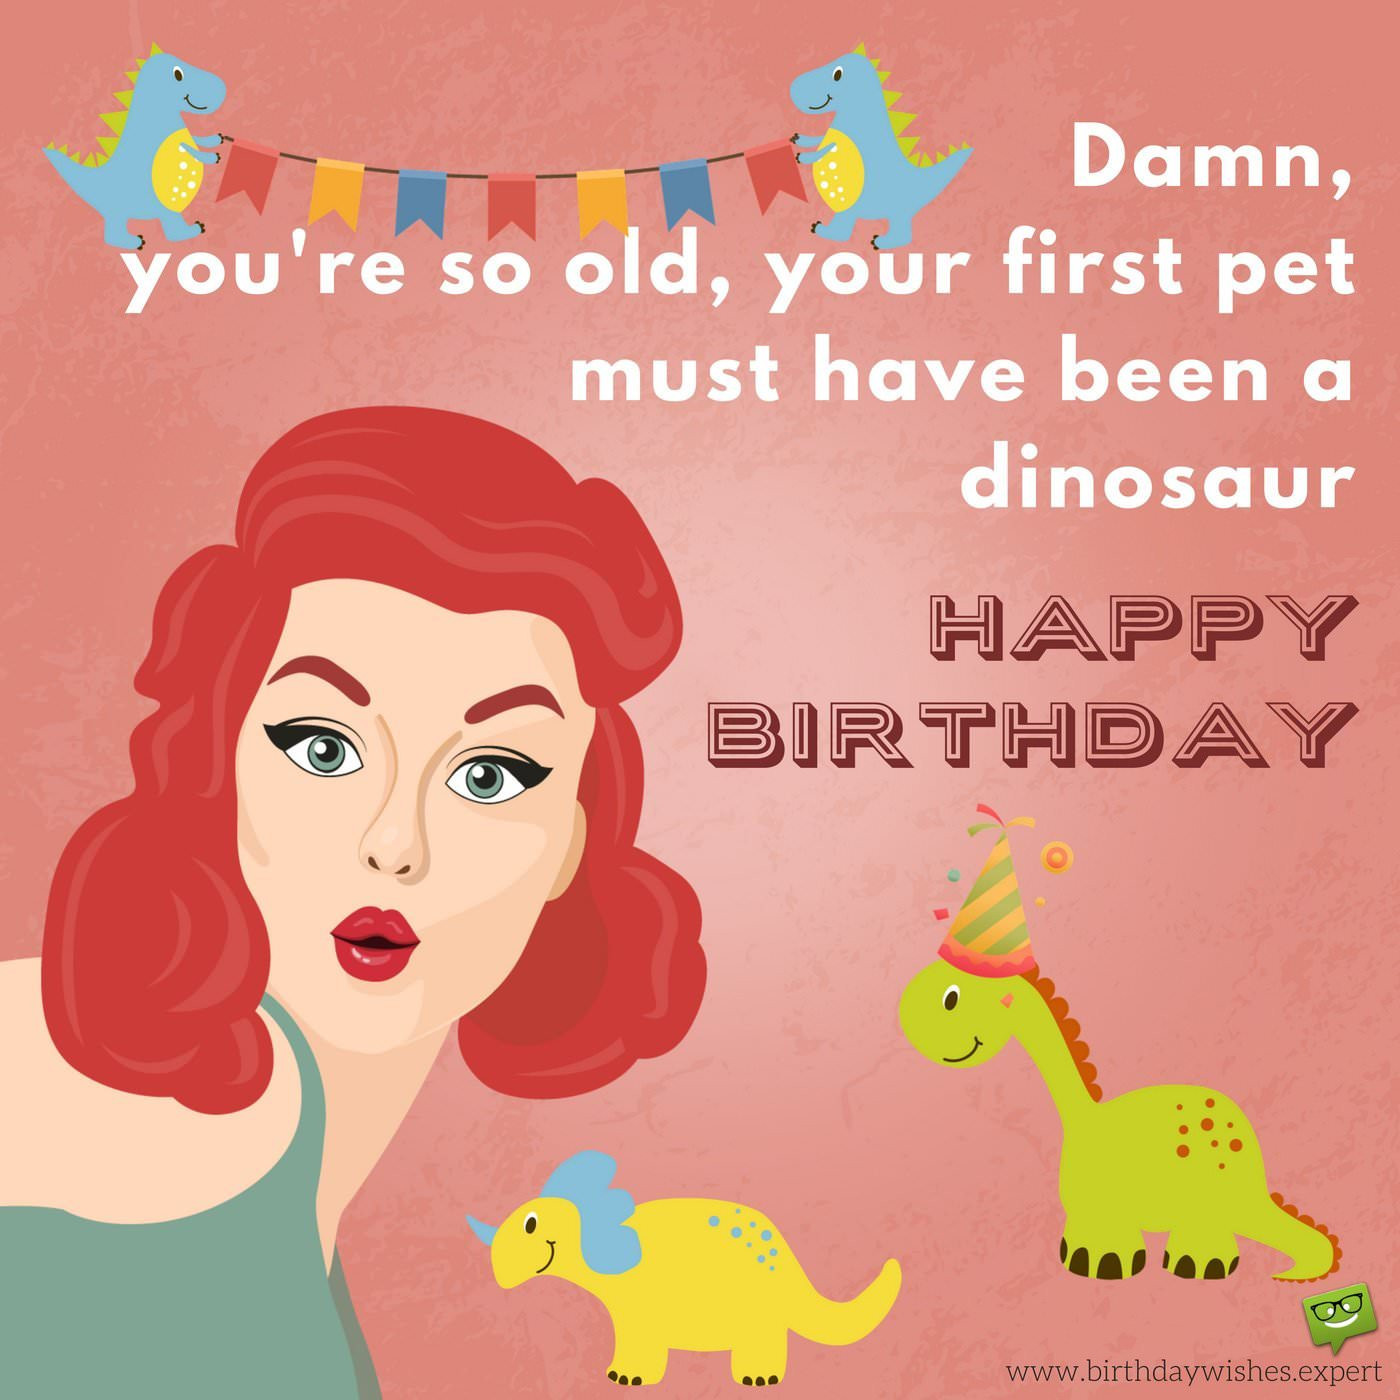 Funny Happy Birthday Messages For Women